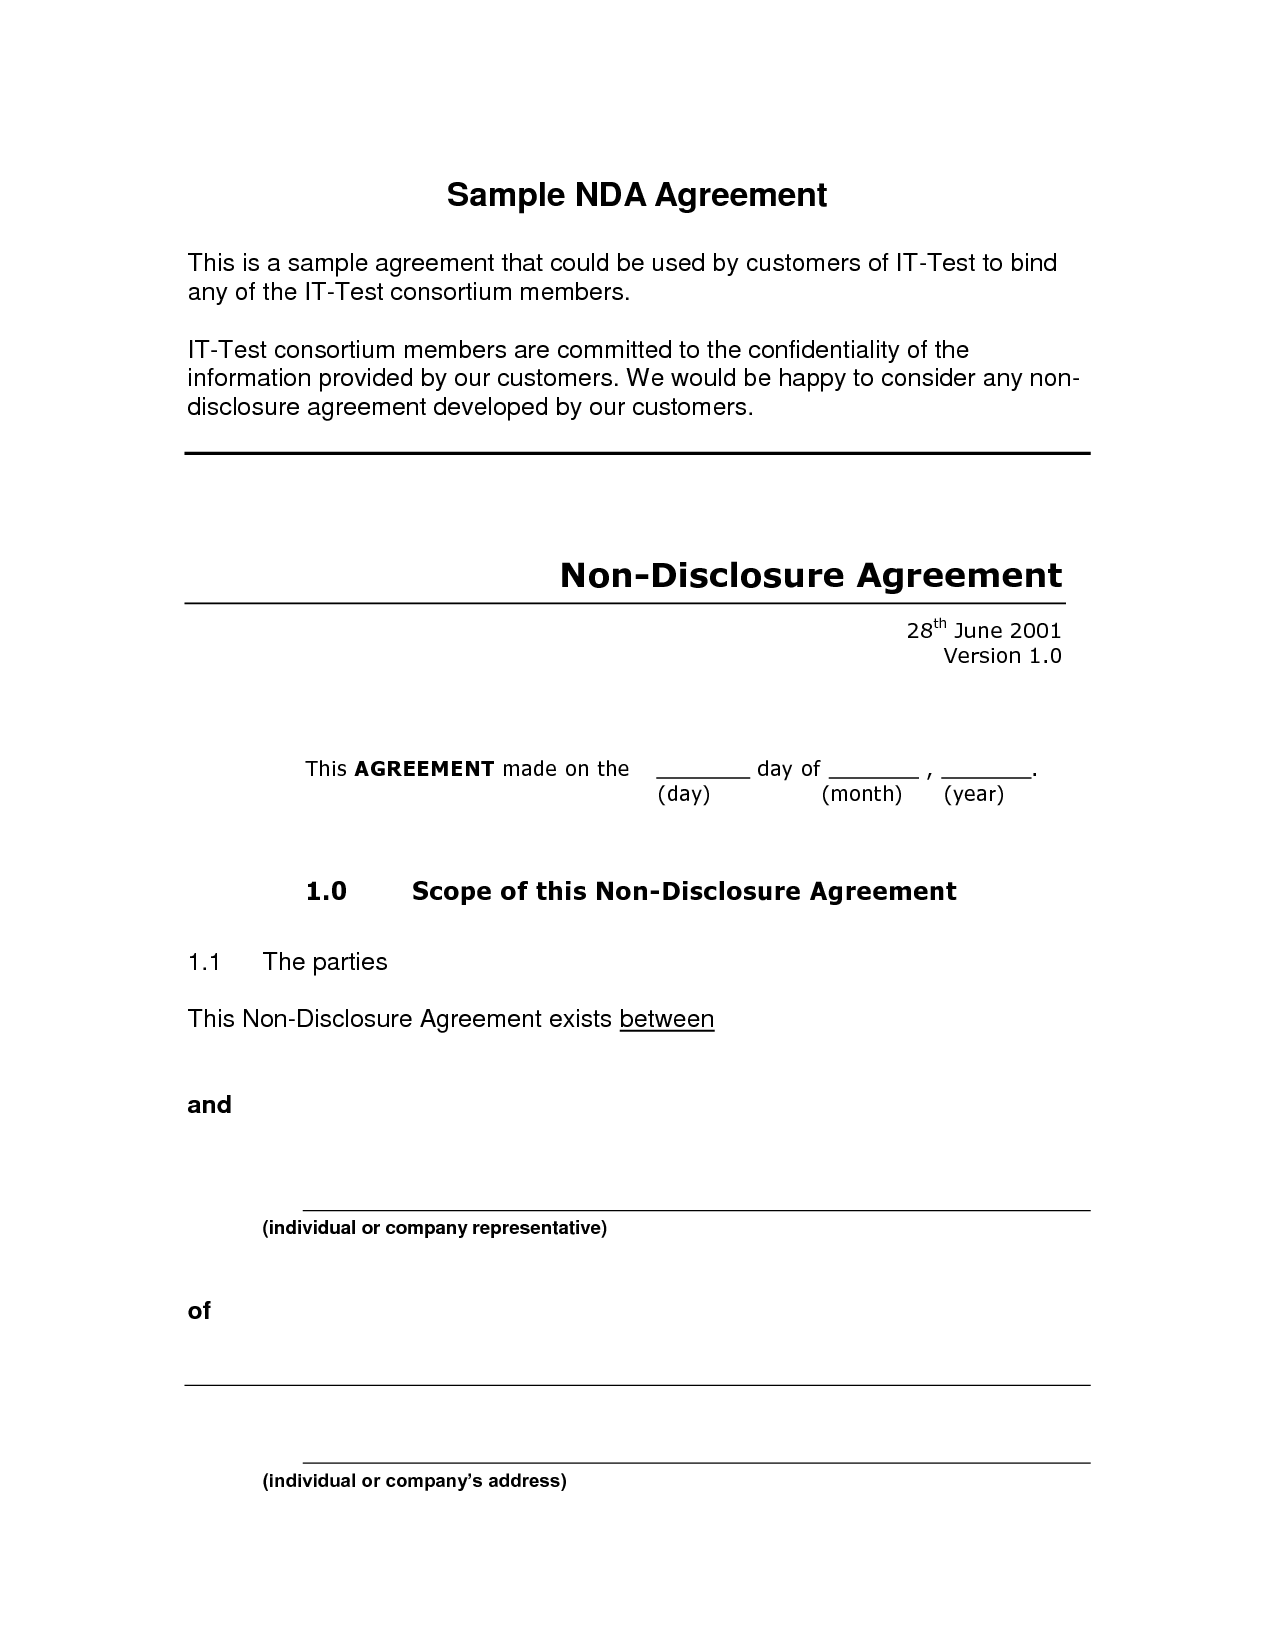 Non Disclosure Agreement Sample Free Printable Documents